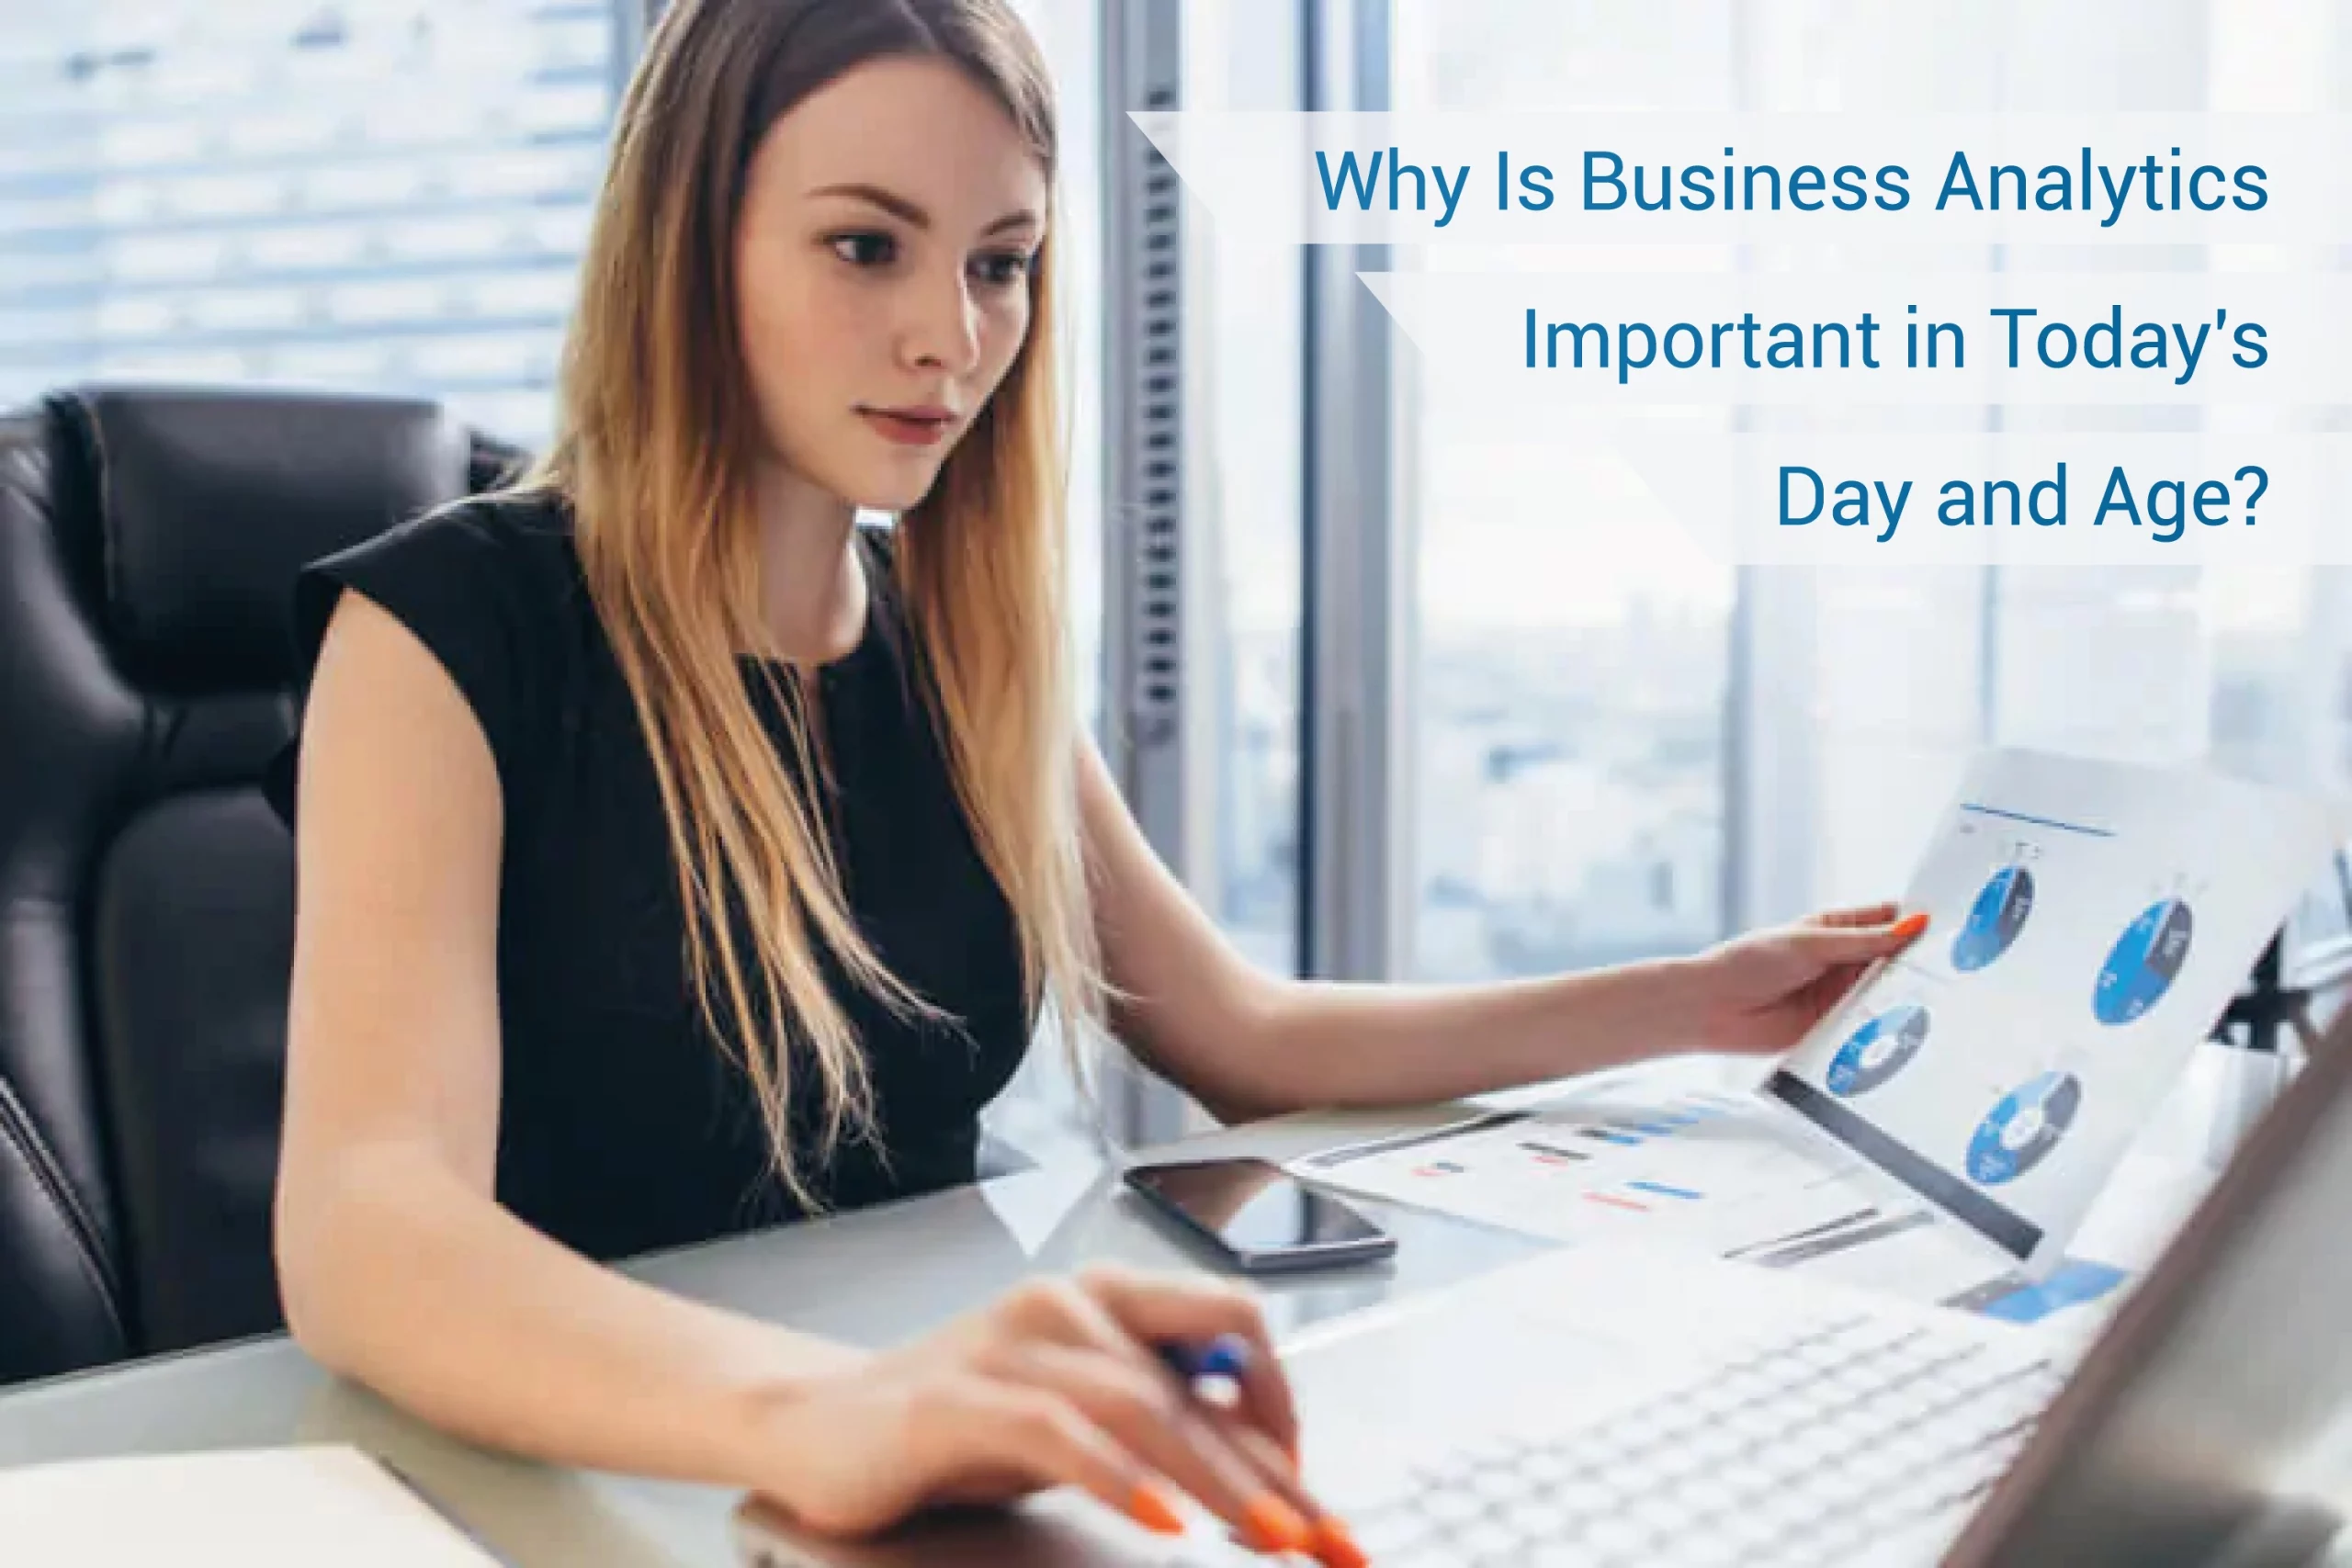 Why Is Business Analytics Important in Today’s Day and Age?